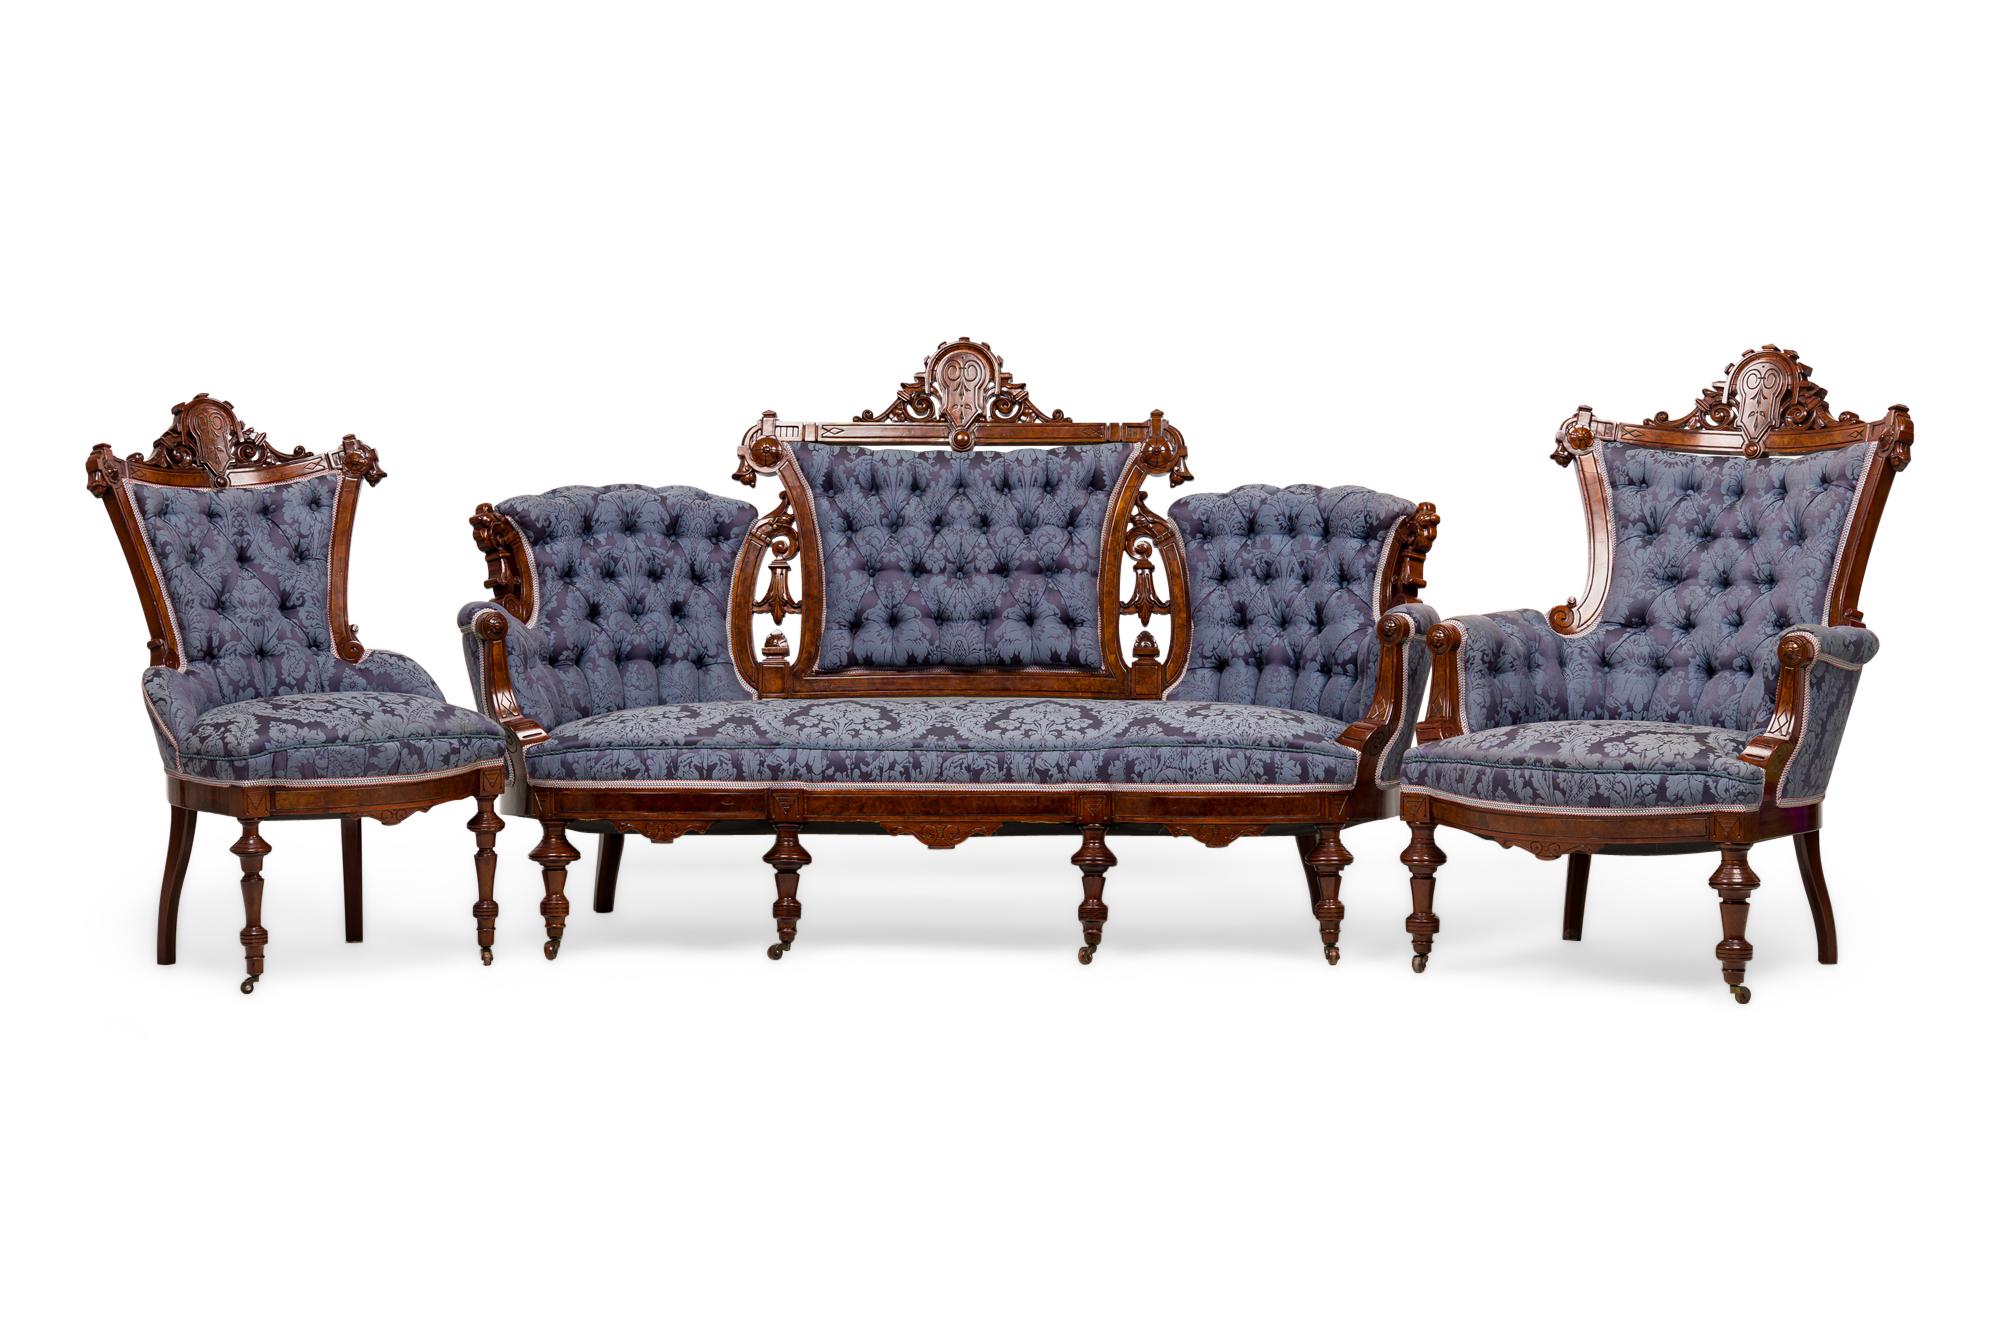 7 Piece American Victorian upholstered living room set including 1 settee, 2 armchairs and 4 side chairs with elaborately carved mahogany wood frames, with mythological motif pediments, turned front legs ending in brass casters and shaped grounded